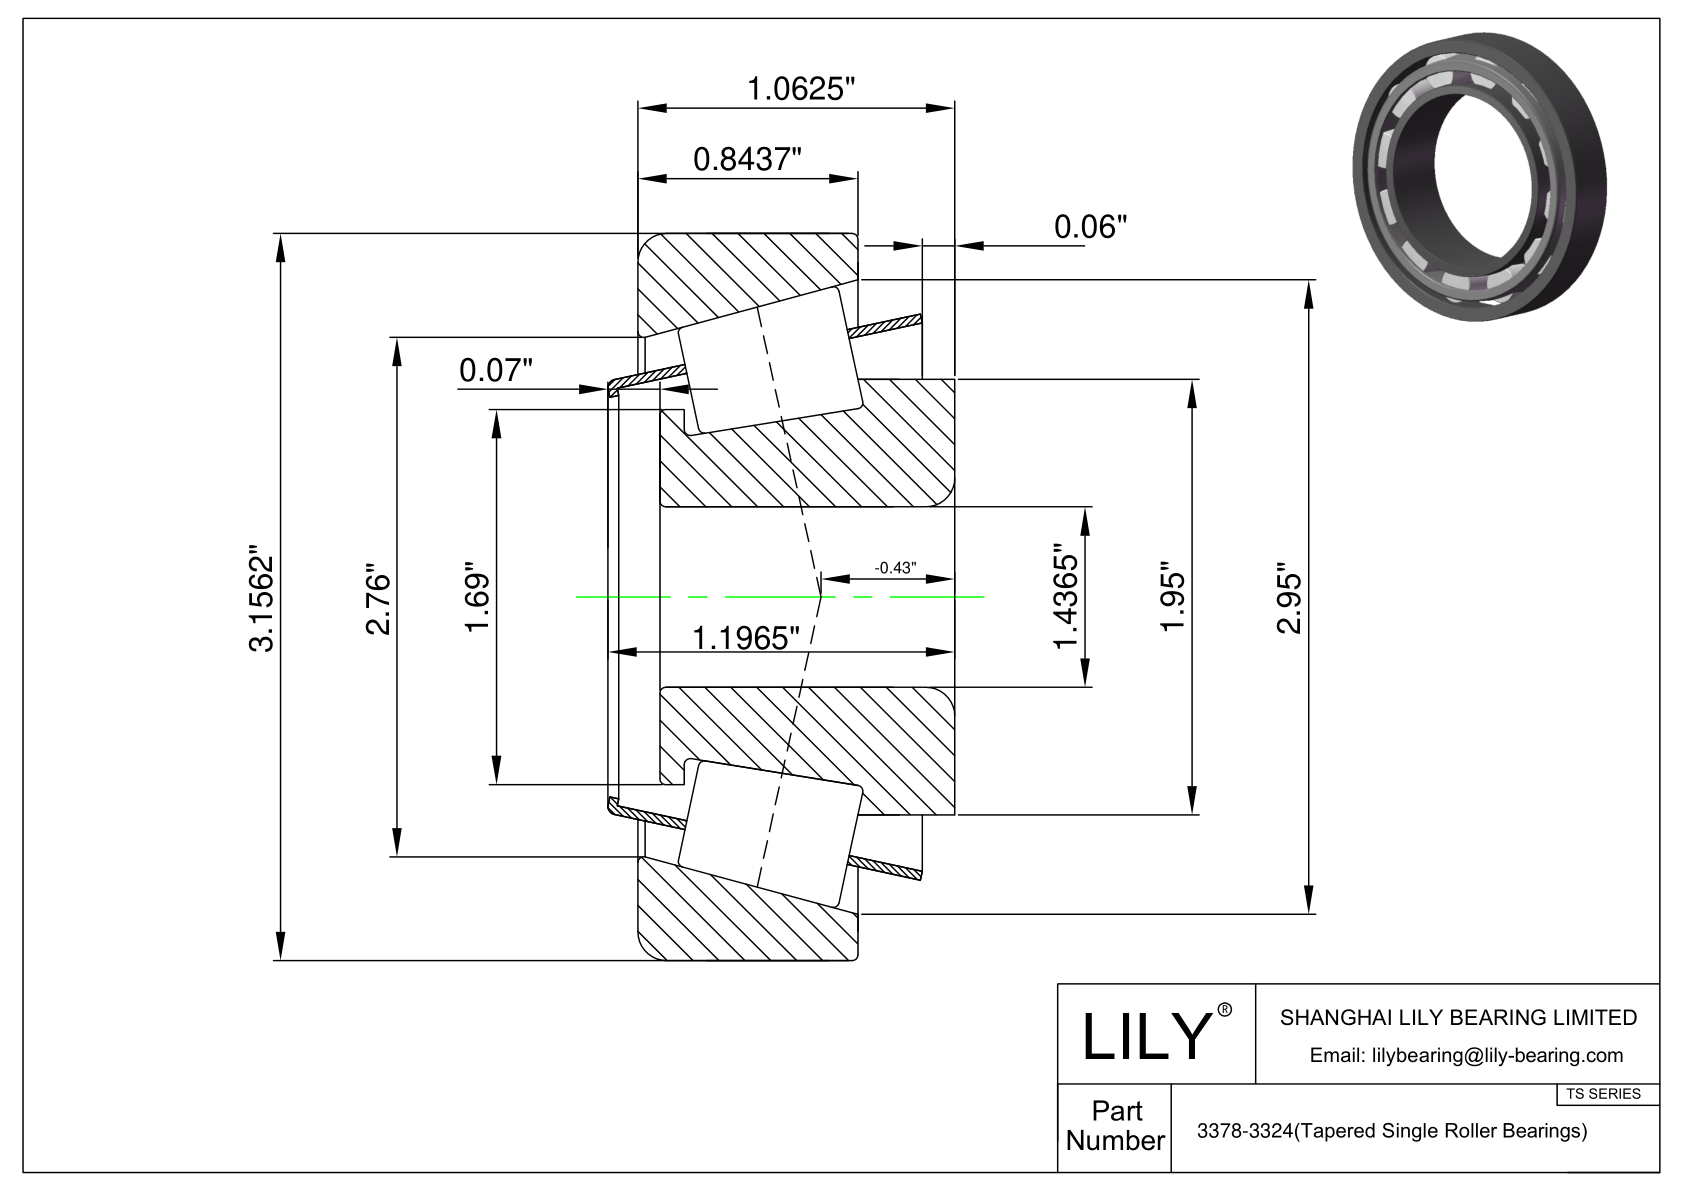 3378-3324 TS (Tapered Single Roller Bearings) (Imperial) cad drawing